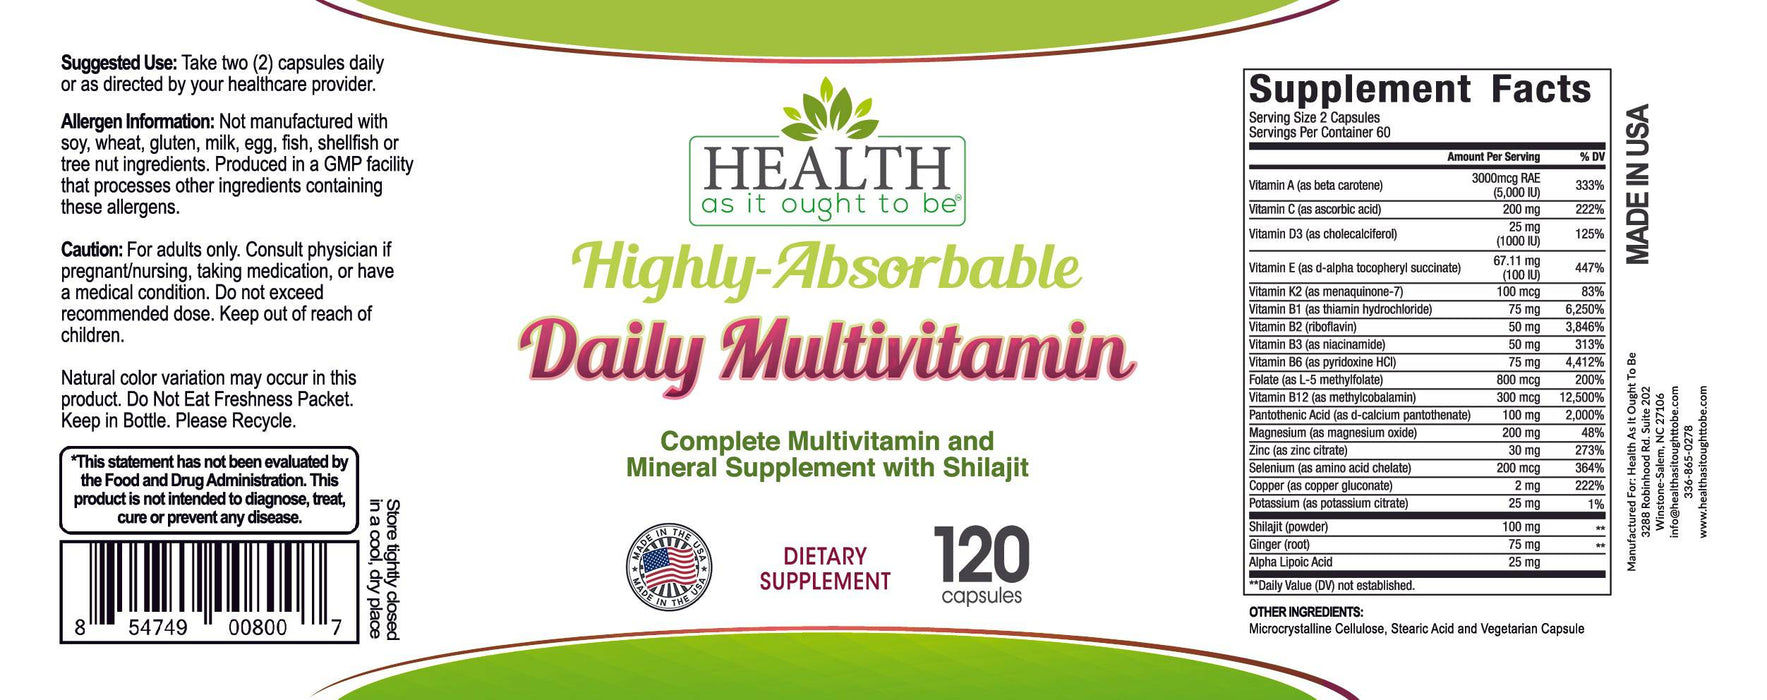 HAIOTB Highly-Absorbable Daily Multivitamin - 120 Capsules - Health As It Ought to Be